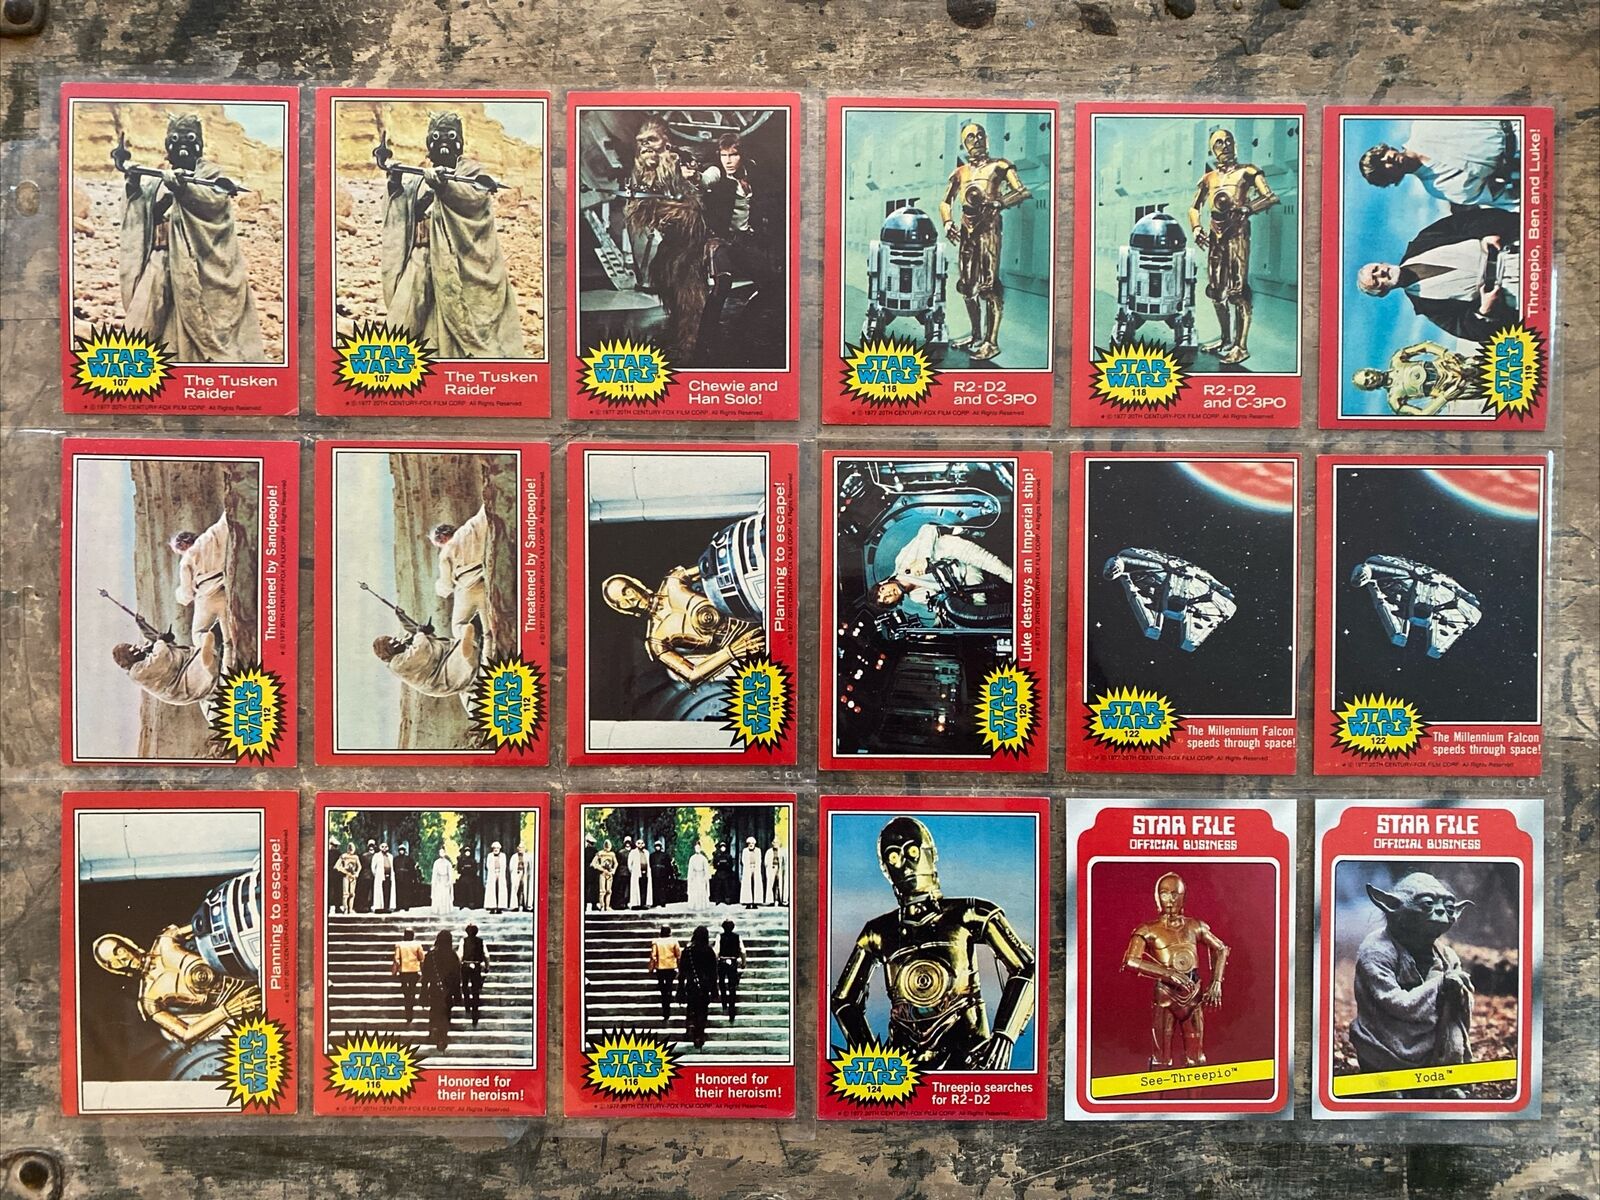 1977 Topps Star Wars Cards - 18 Total